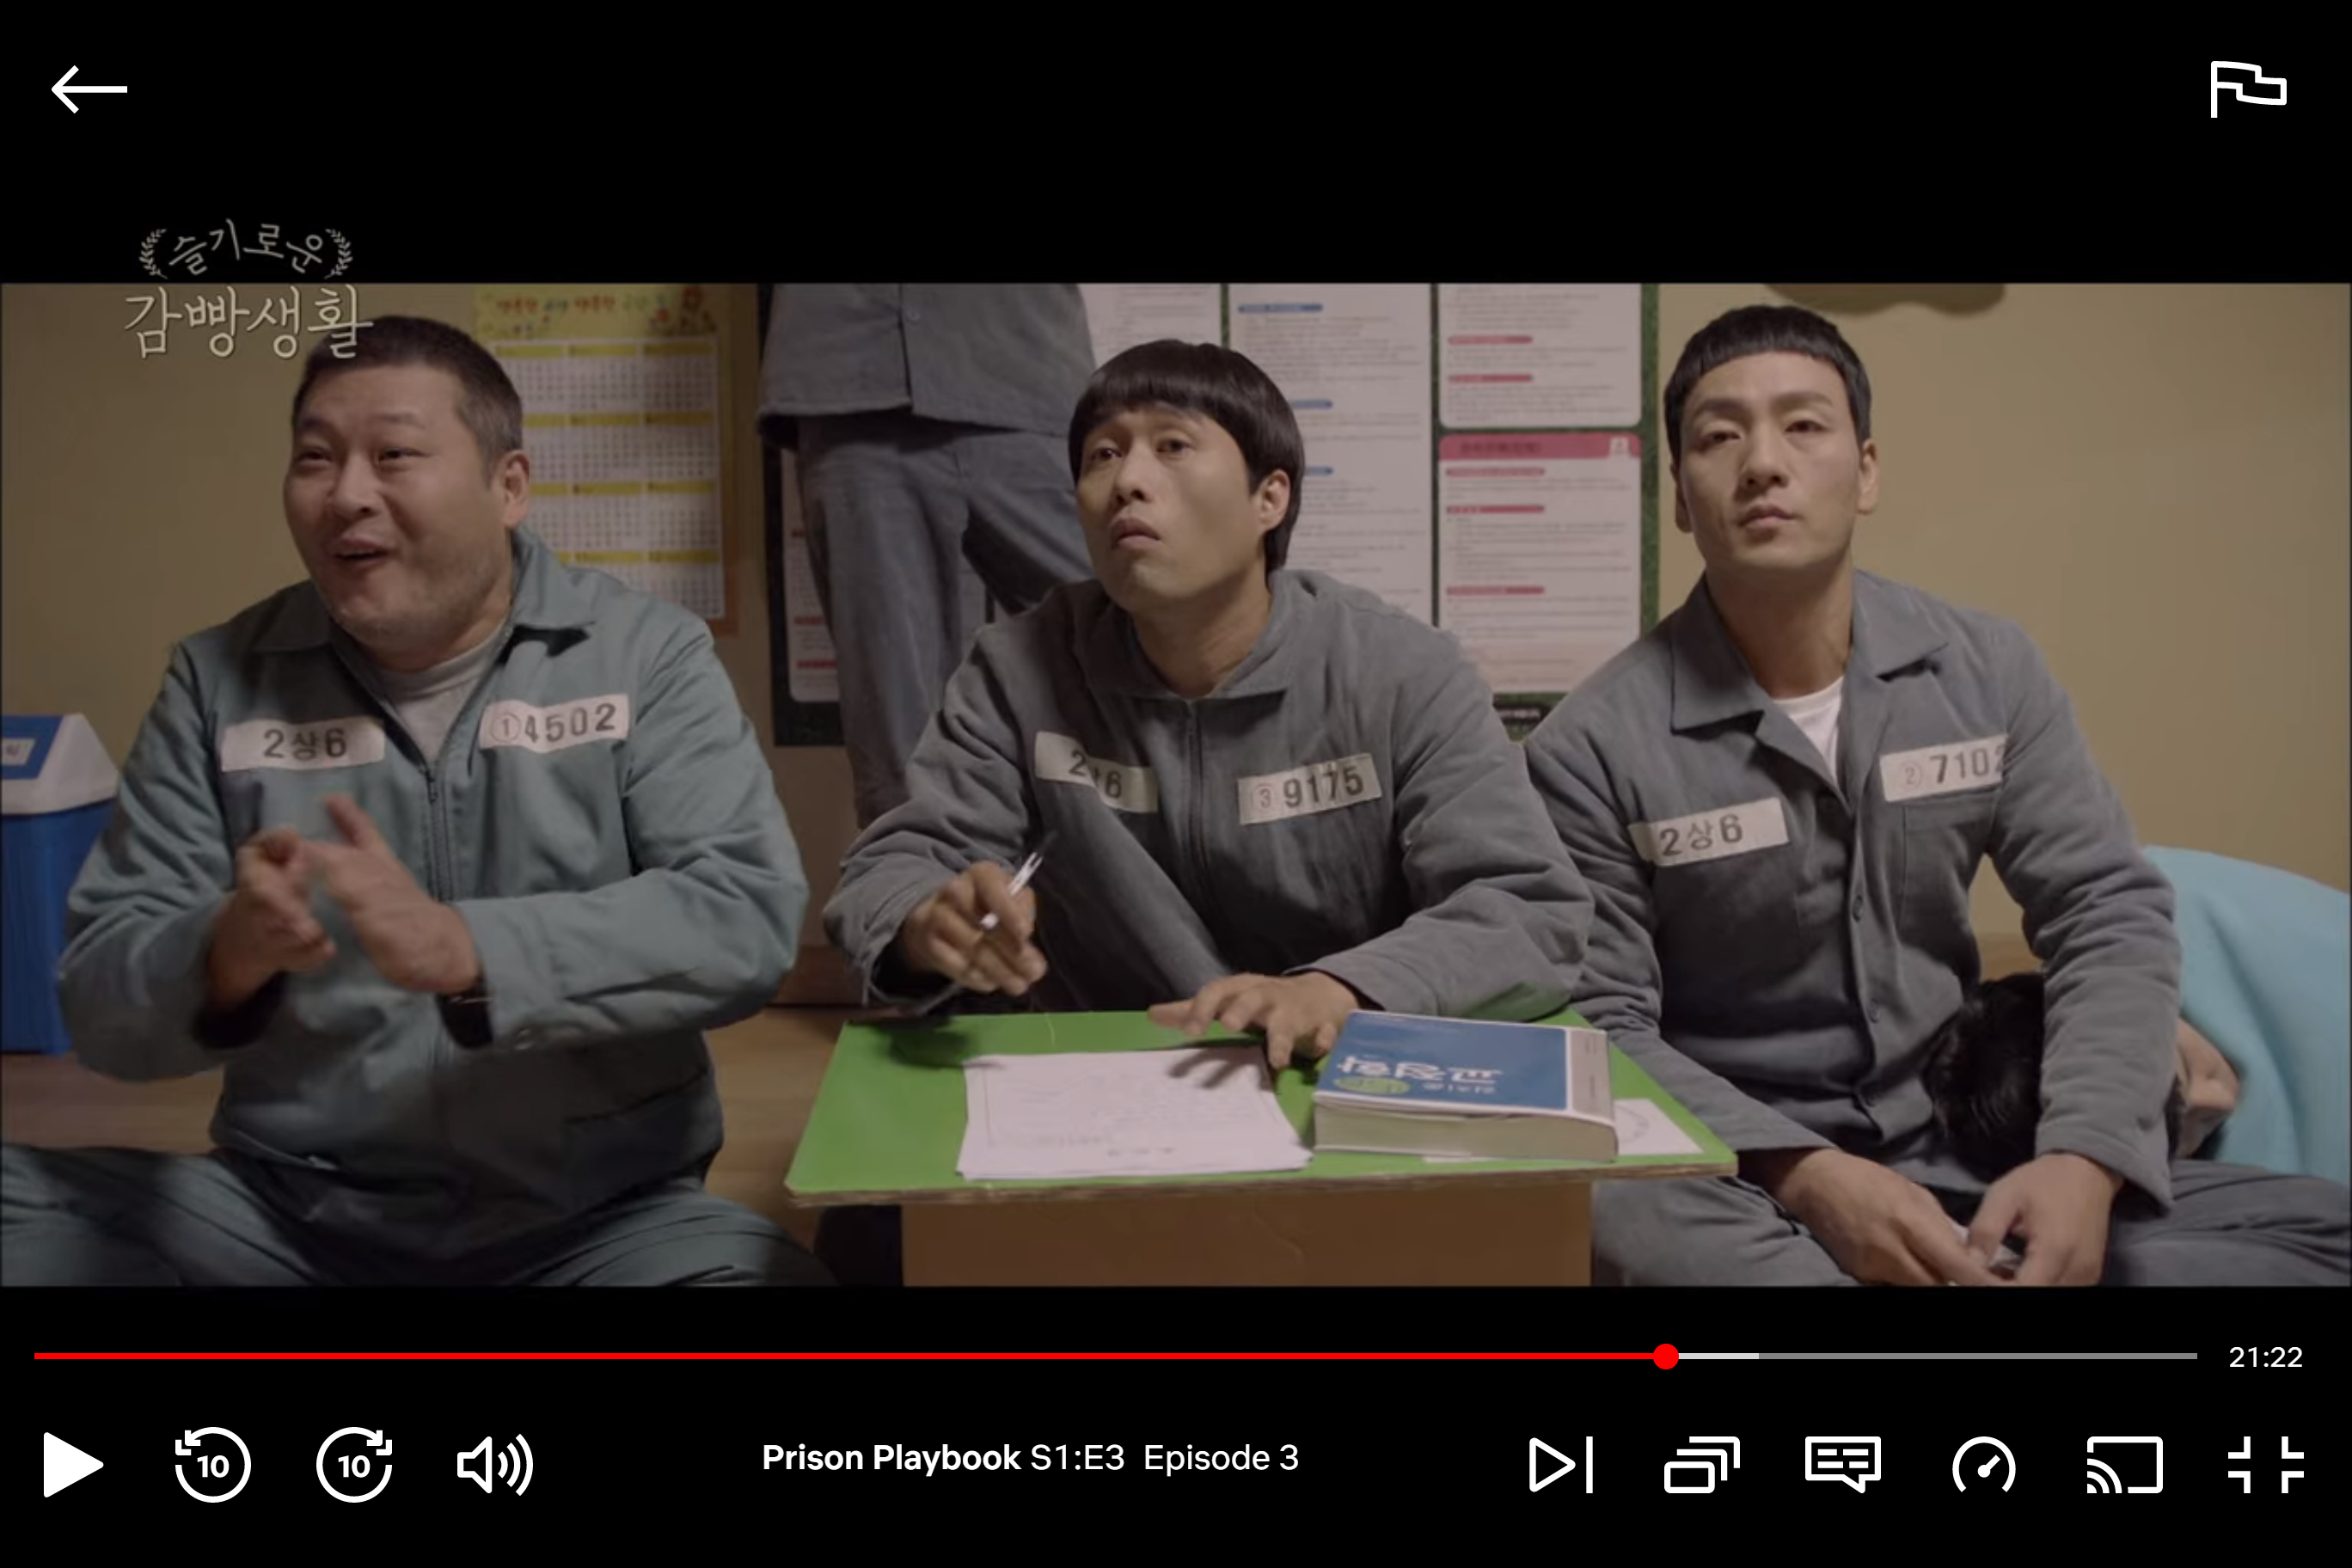 Three prisoners from the show trying to watch TV (Kim Je-hyuk is on the far right)